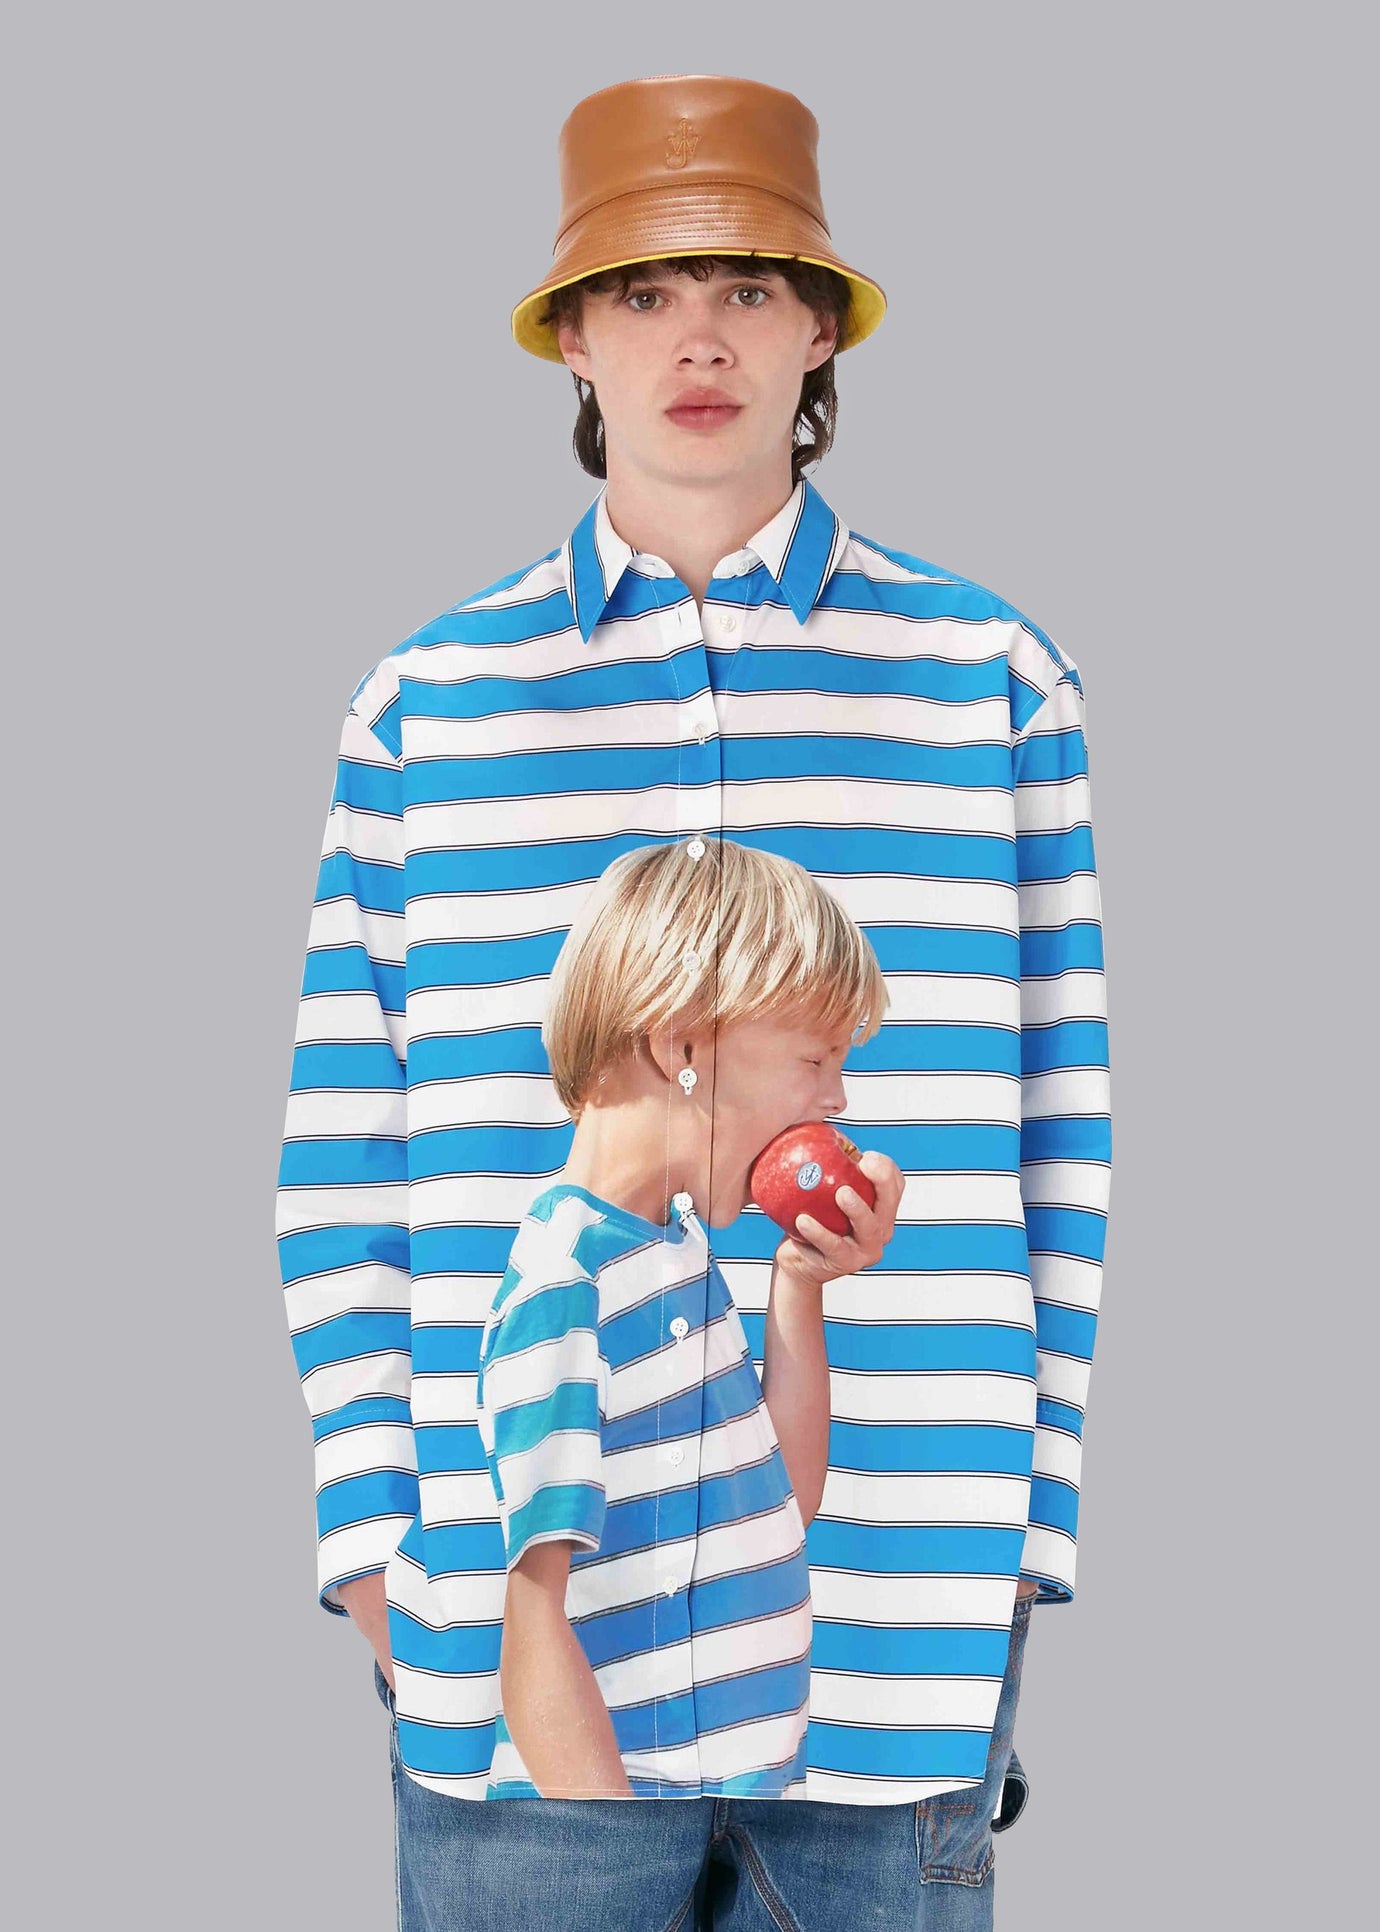 JW Anderson Boy with Apple Oversized Shirt - Blue/White